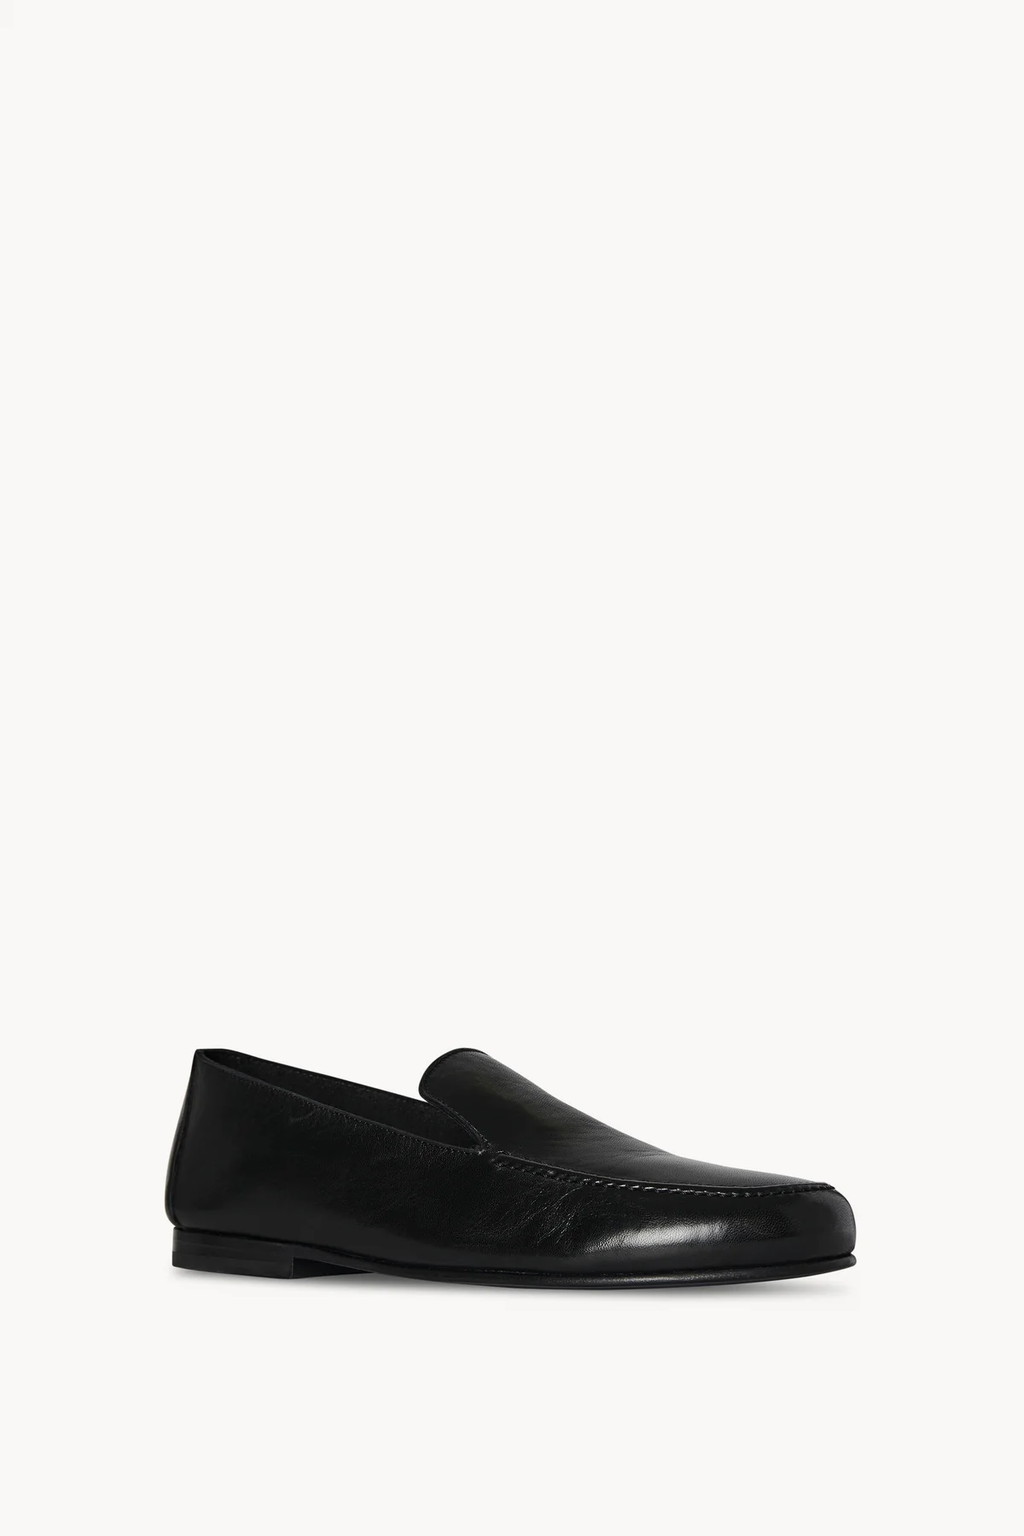 THE ROW Women Colette Loafer